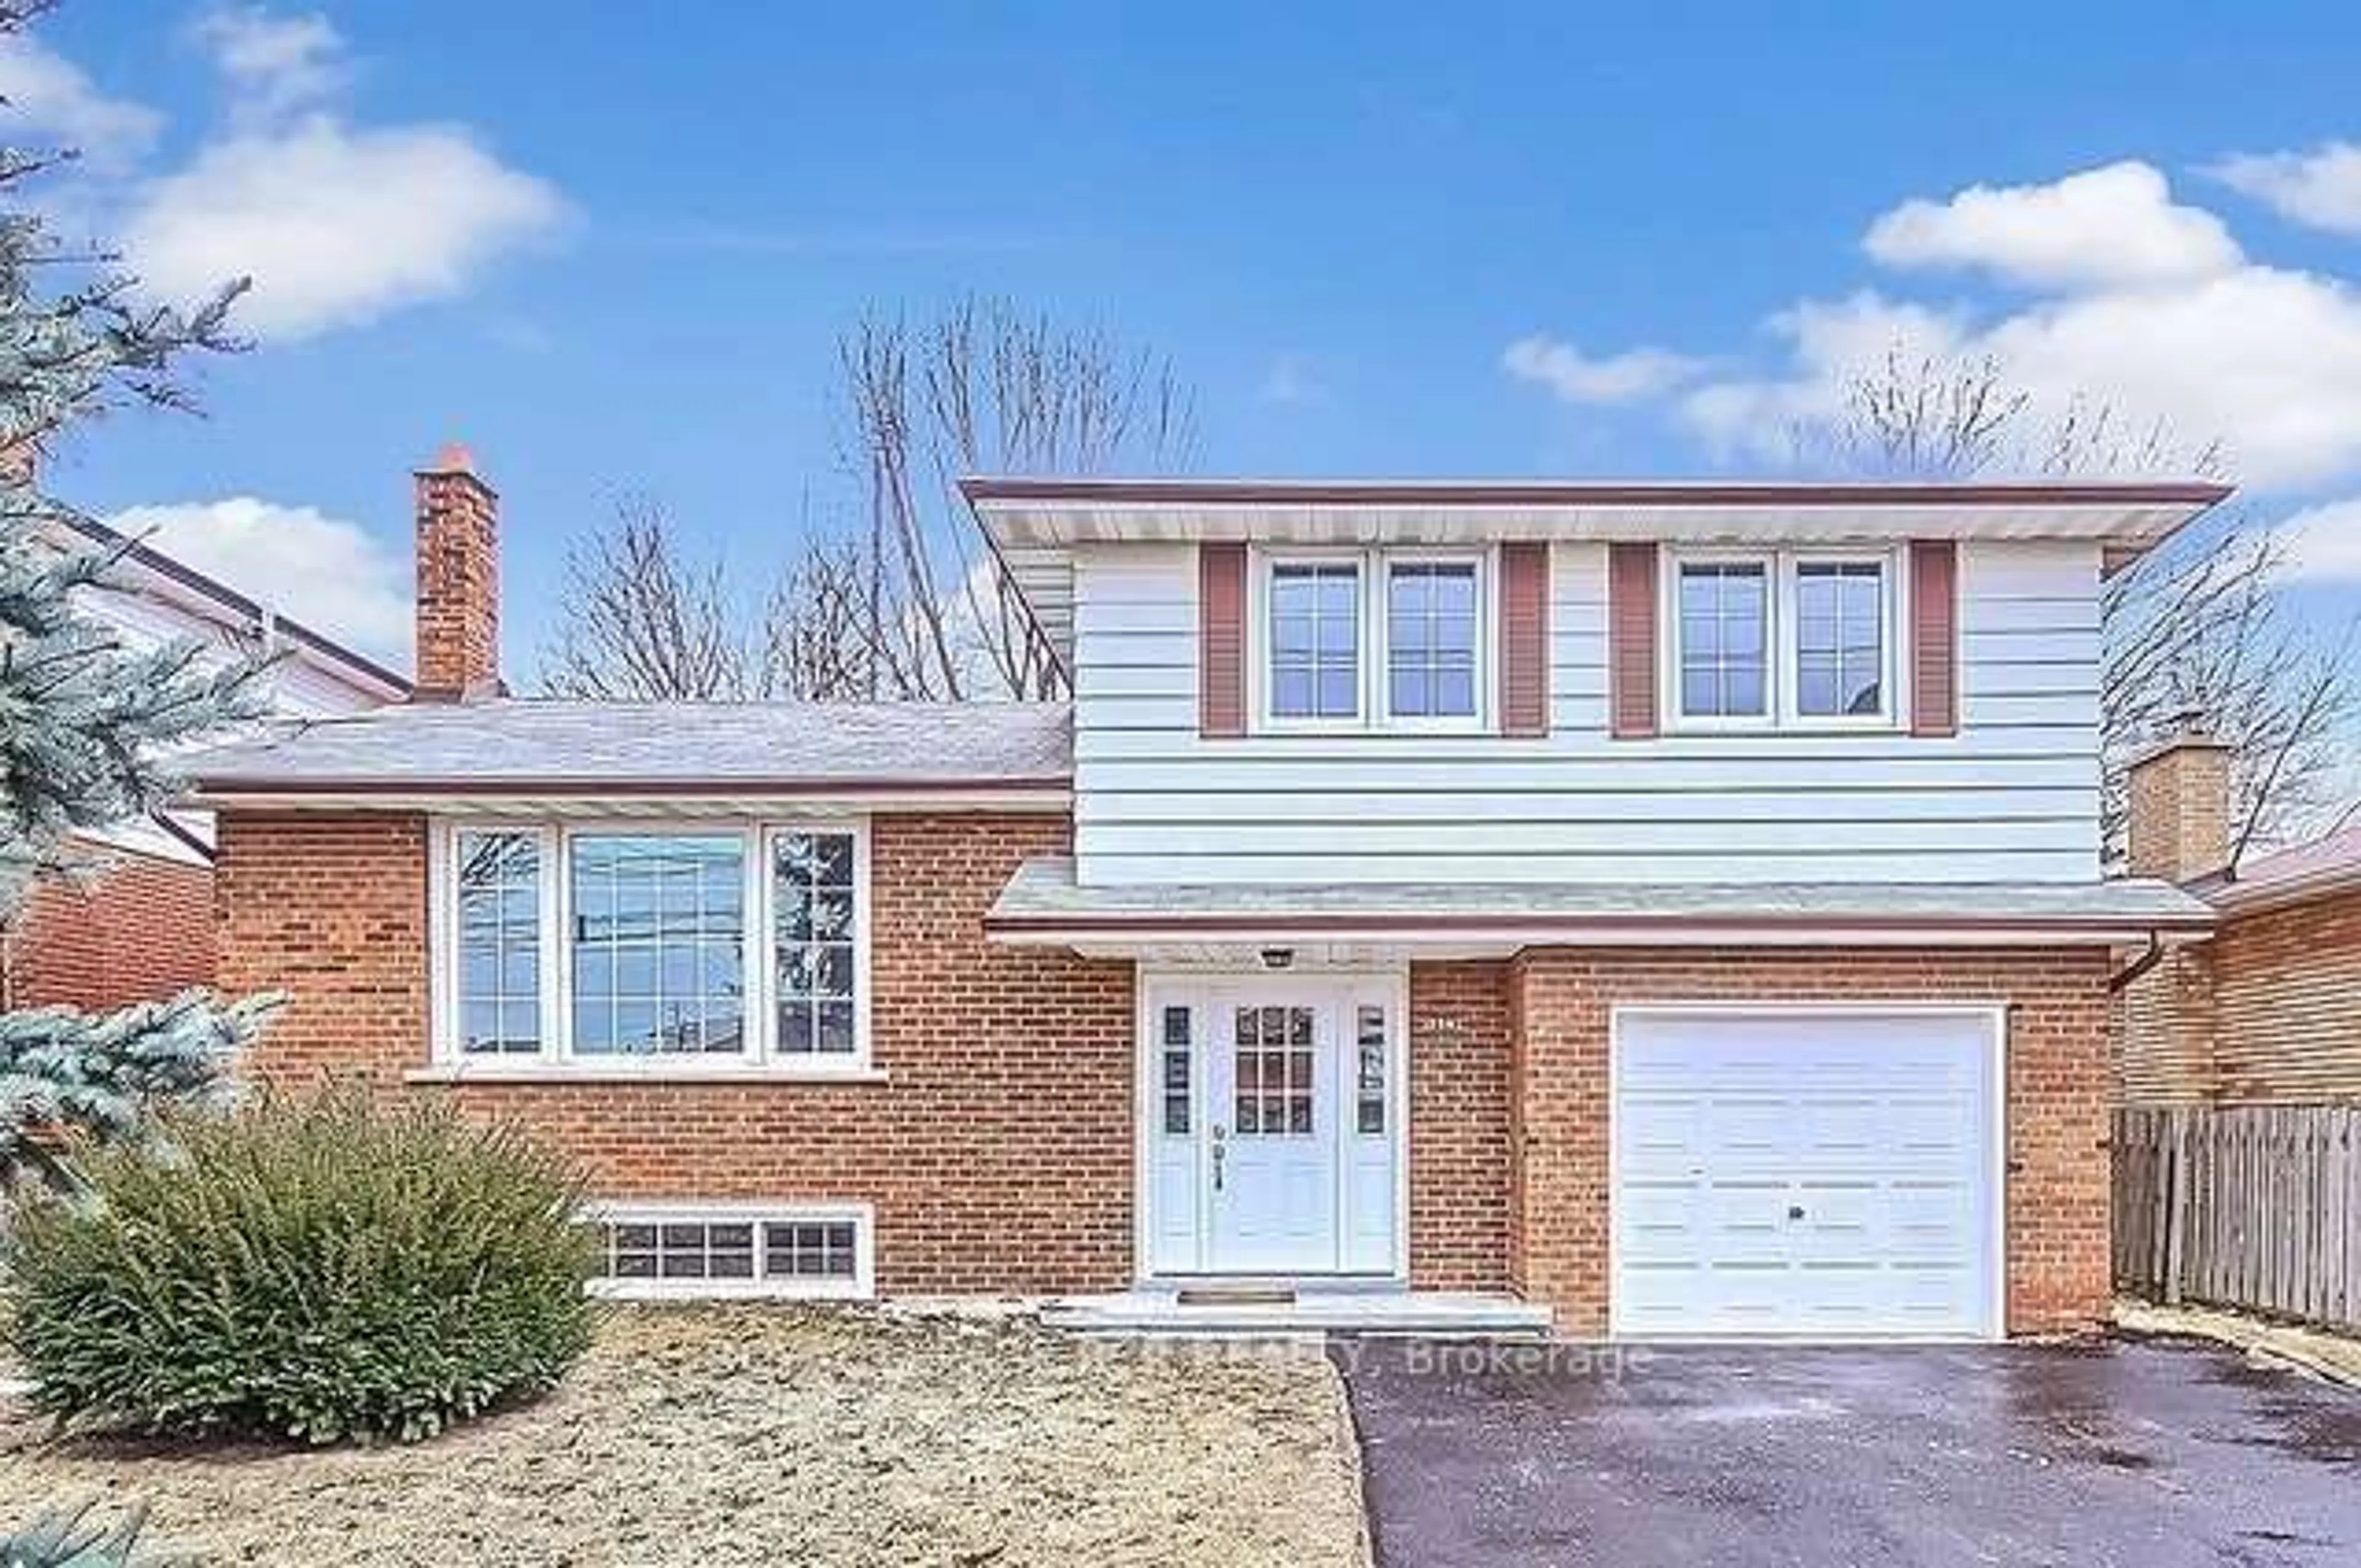 Home with brick exterior material for 358 Agar Ave, Bradford West Gwillimbury Ontario L3Z 1H5